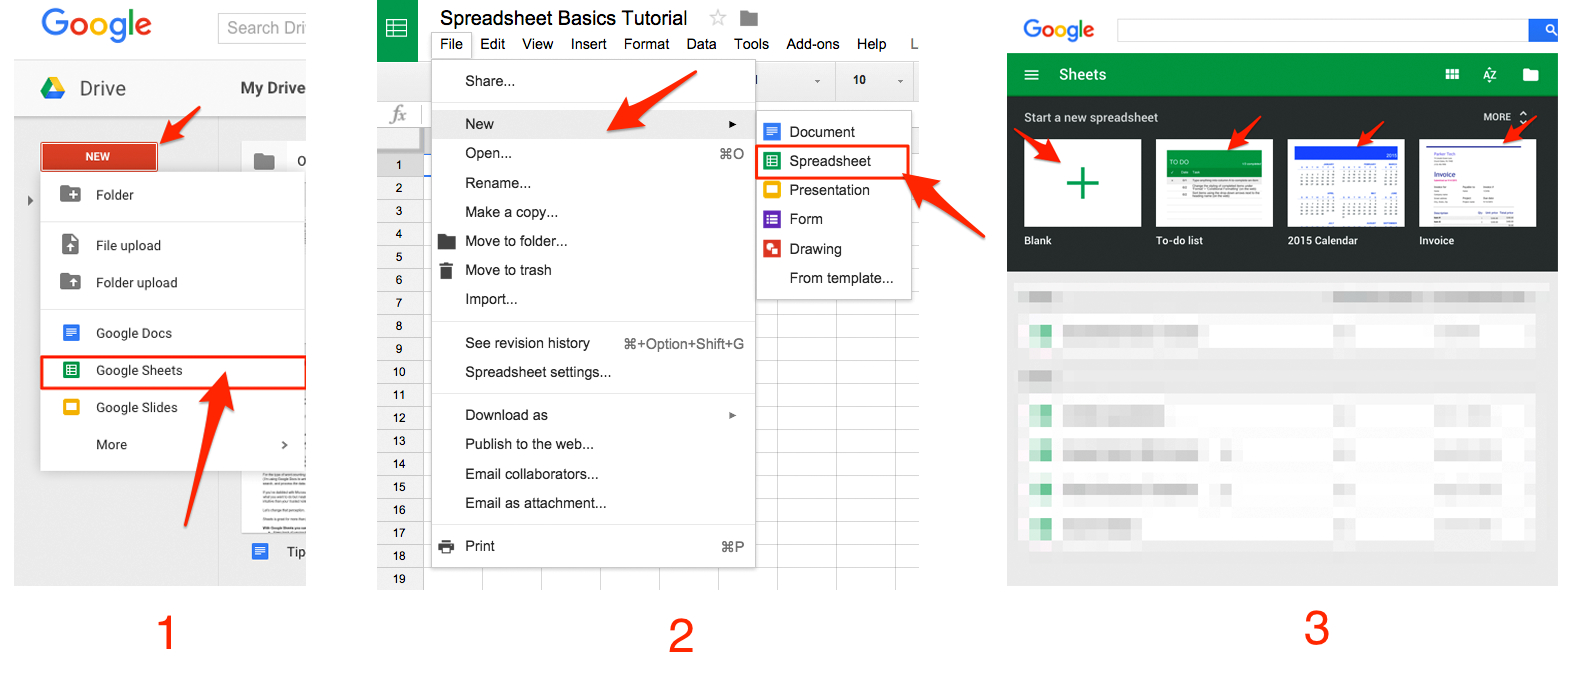 How To Create An Excel Spreadsheet In Google Sheets 101: The Beginner's Guide To Online Spreadsheets  The